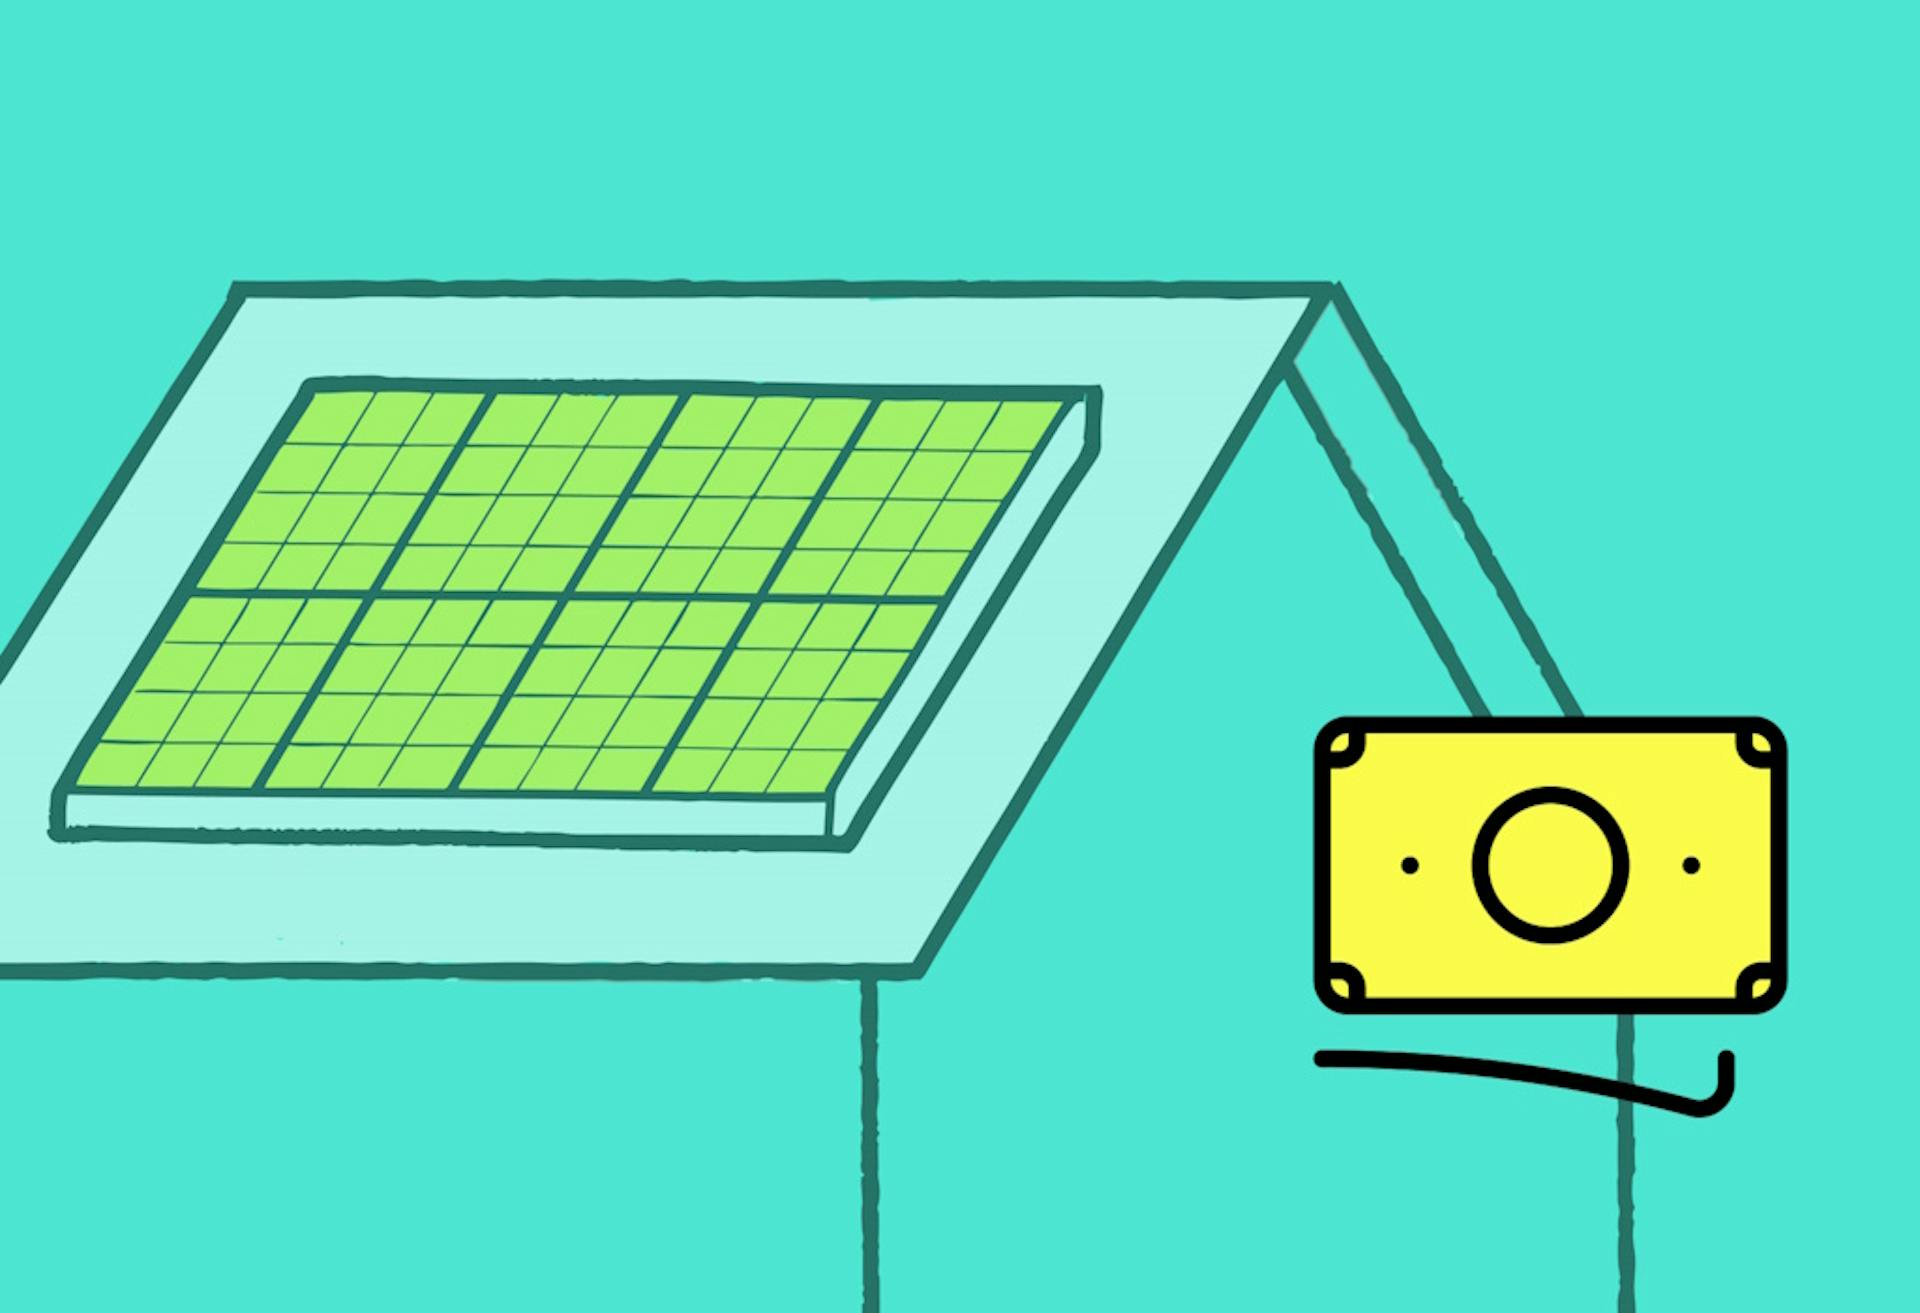 A cartoon of a yellow banknote next to a house with yellow solar panels, against an aquamarine background